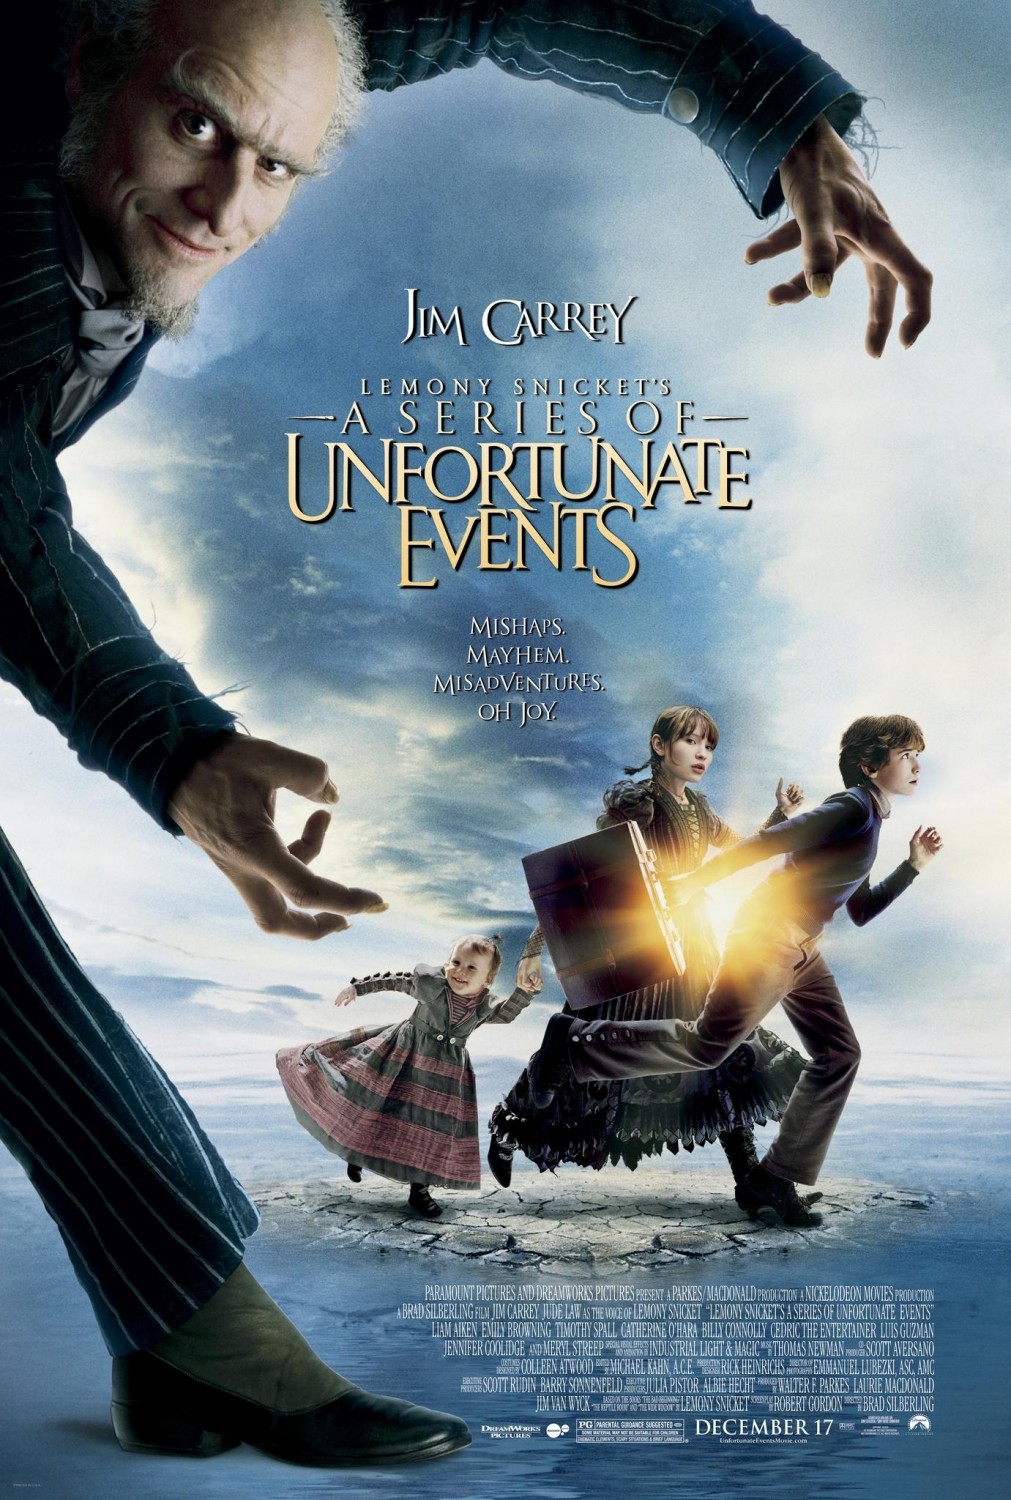 Extra Large Movie Poster Image for Lemony Snicket's A Series of Unfortunate Events (#3 of 4)